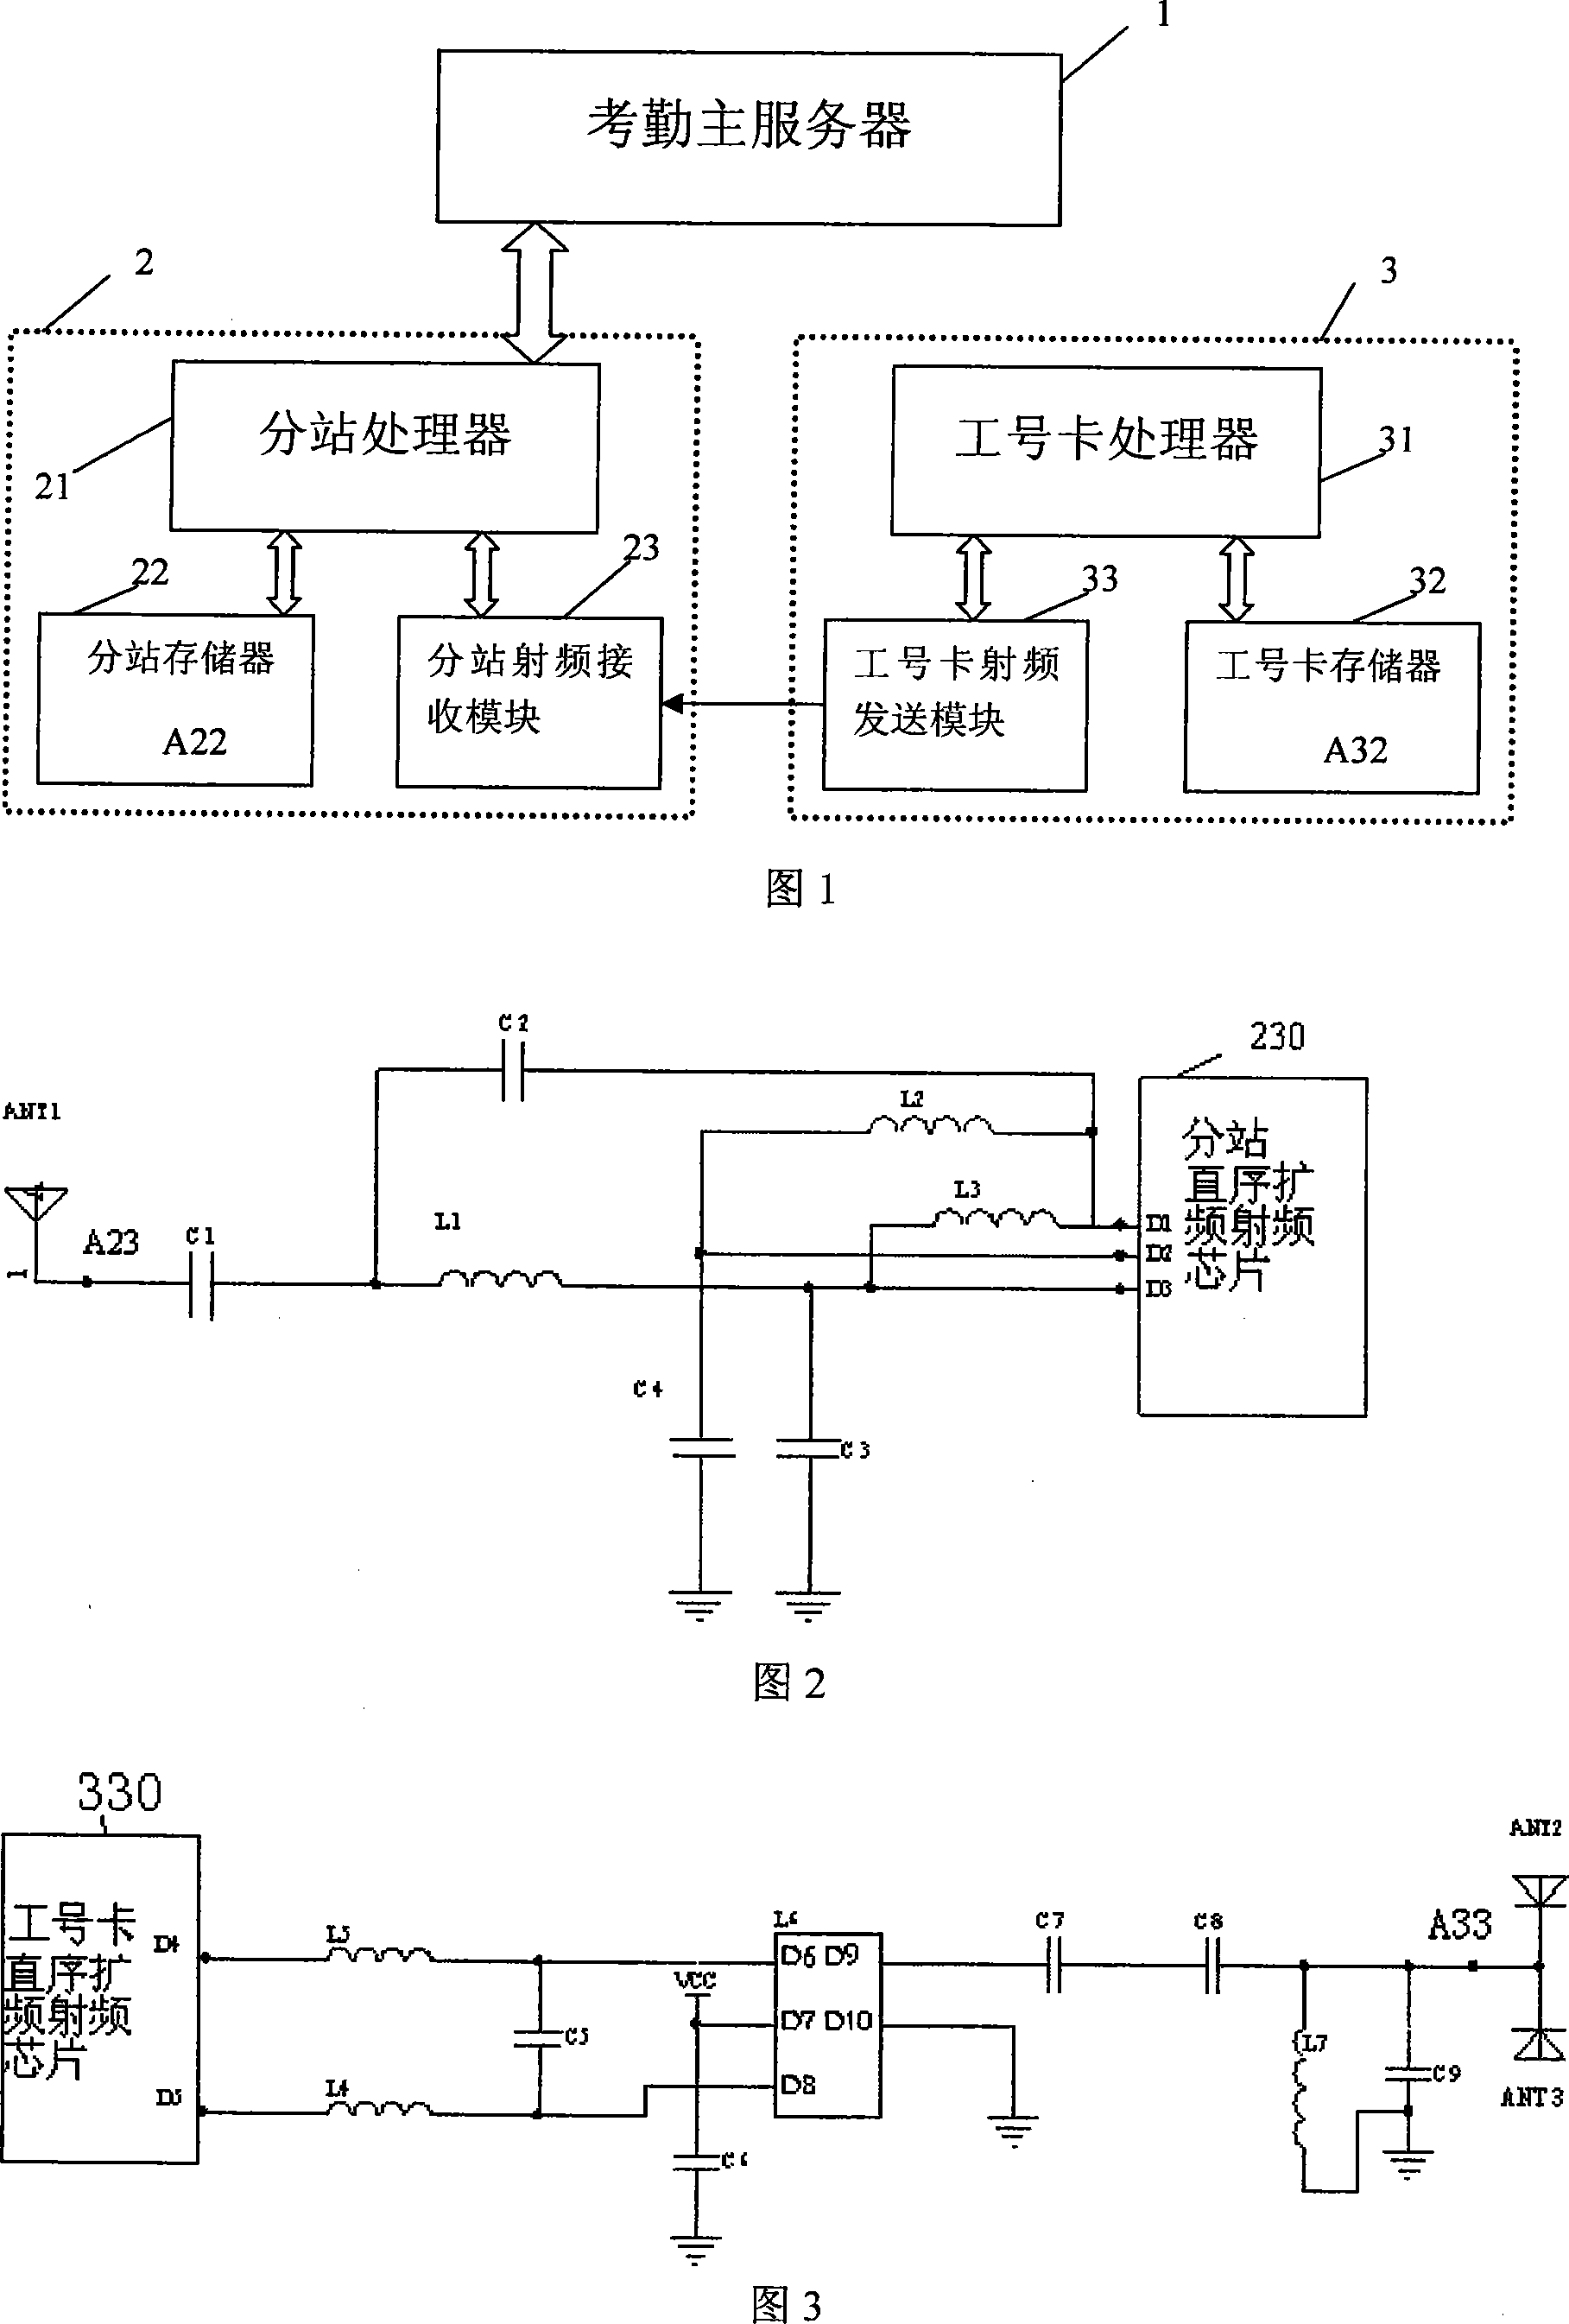 Method for promoting efficiency of short distance radio work attendance device